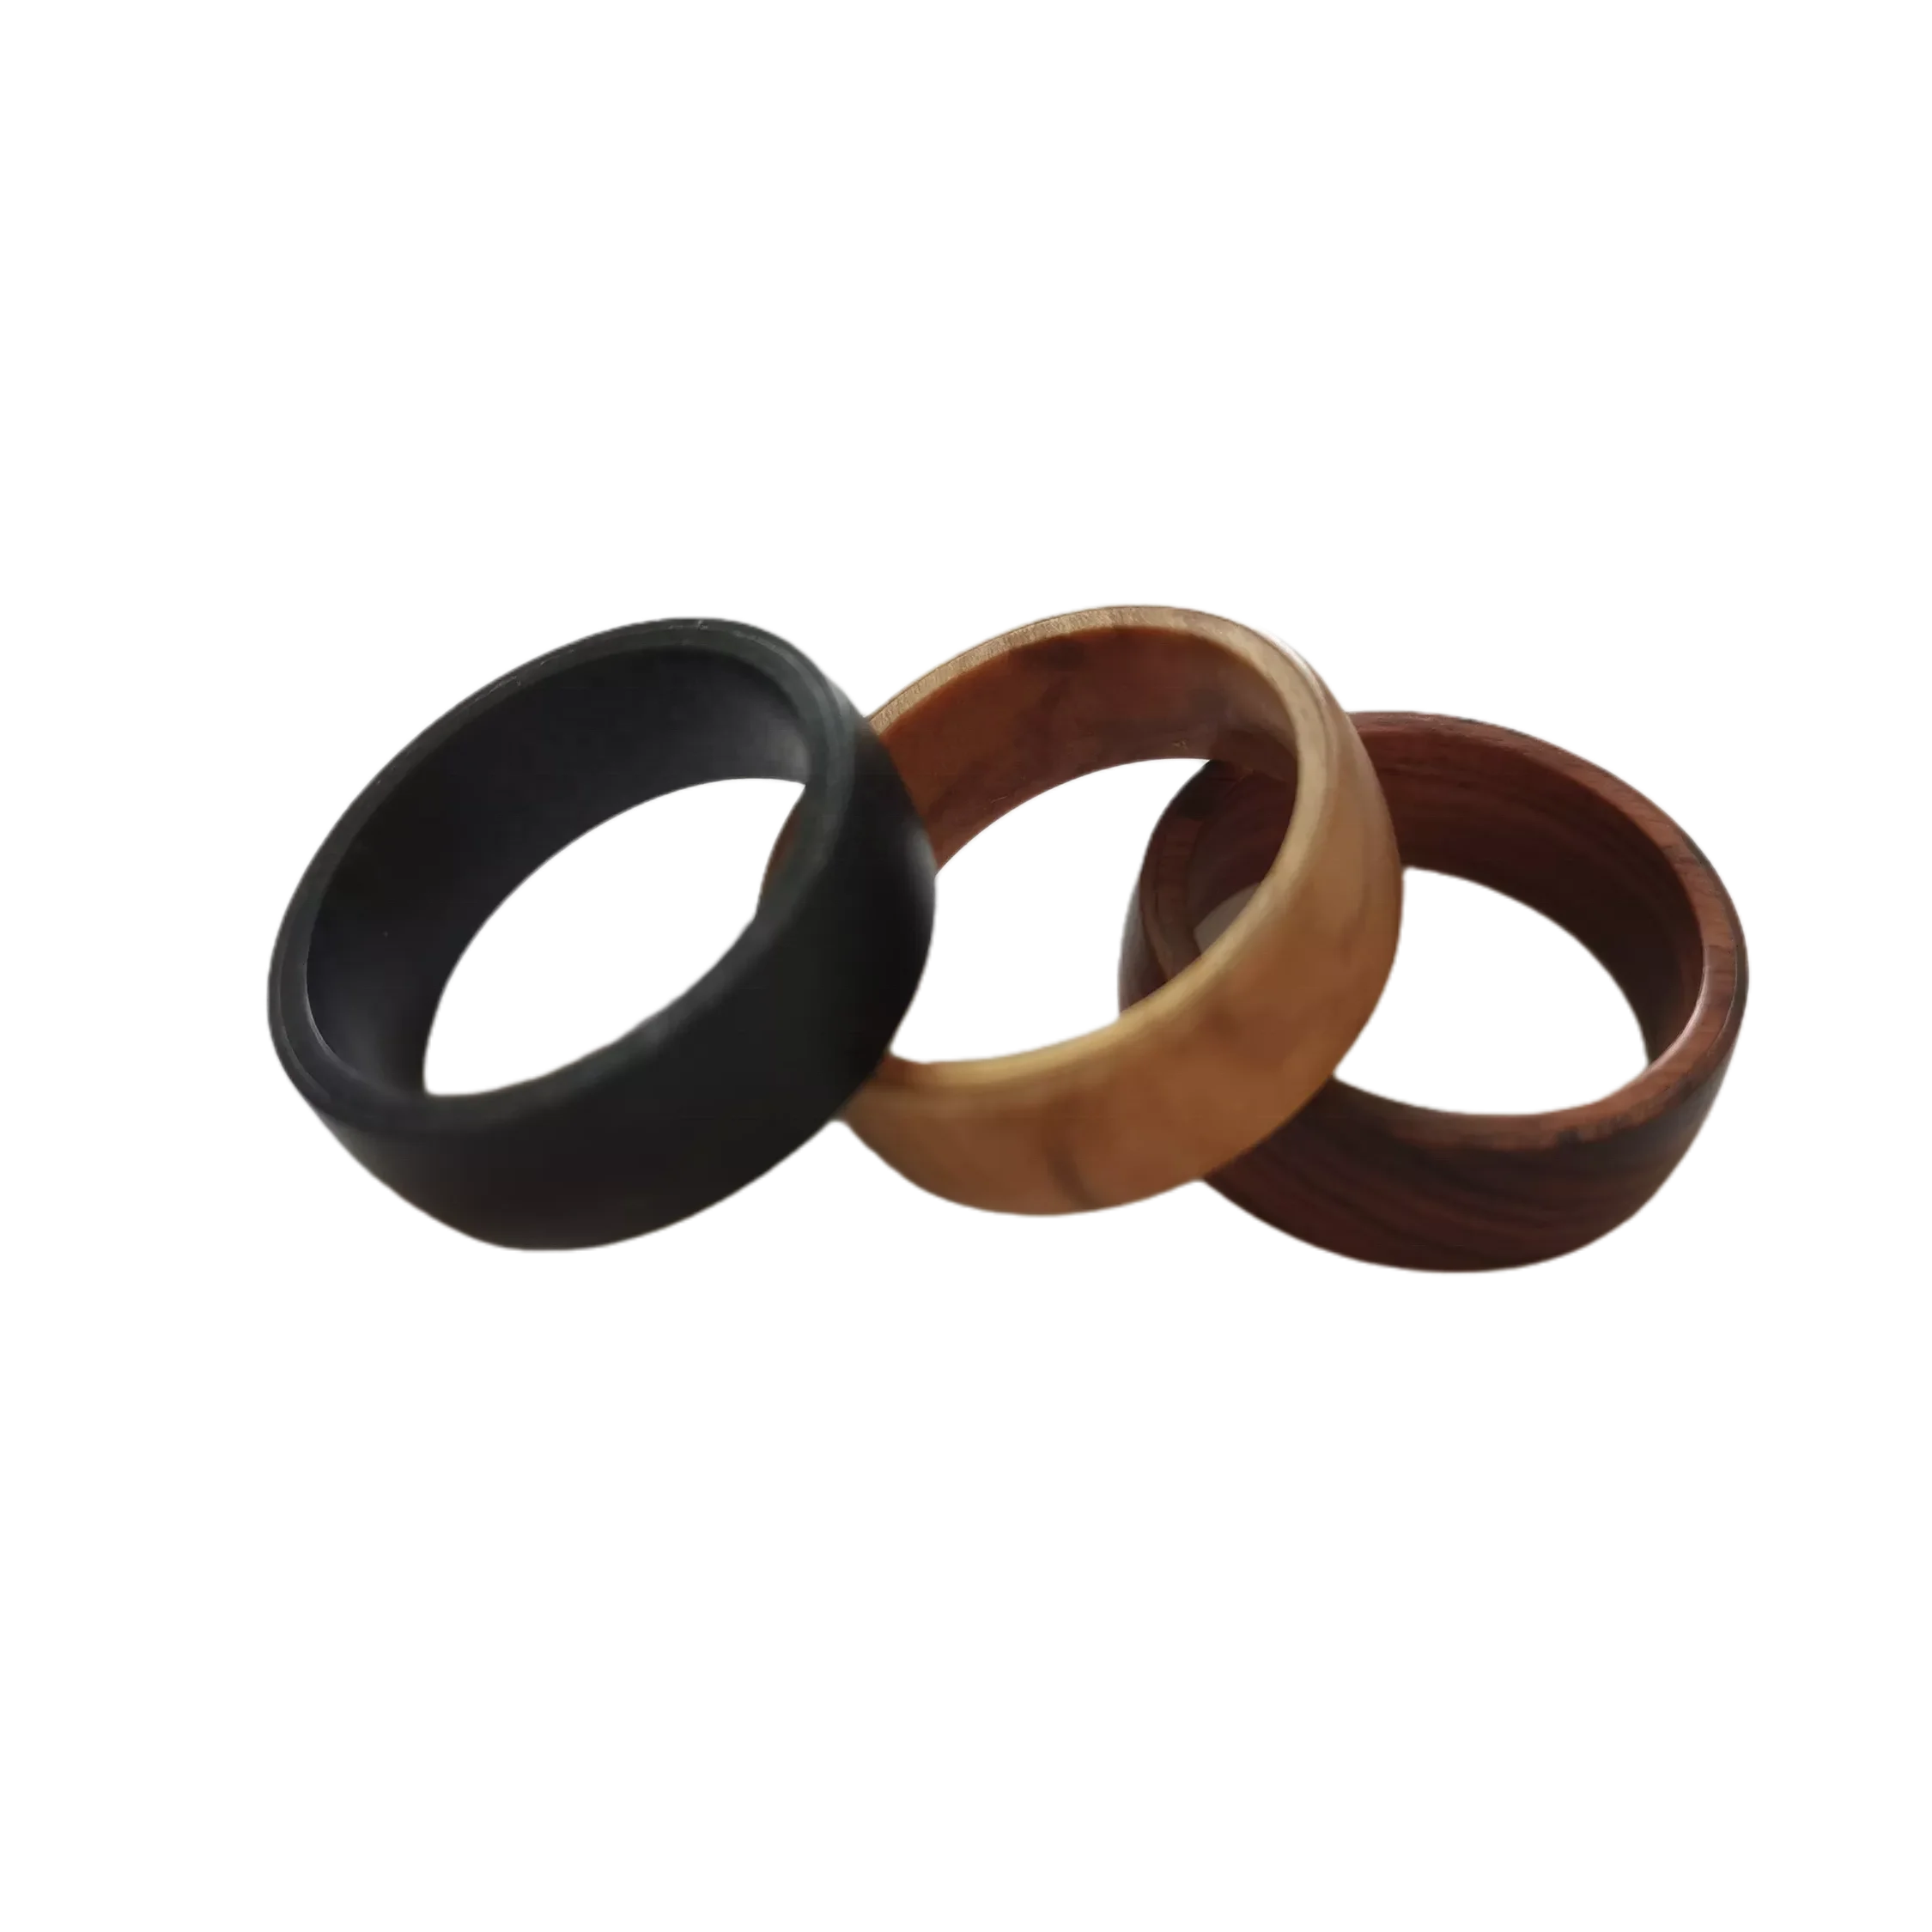 Raap bladeren op Vleugels sap Full Wood Smart Ring Wooden Payment Ring Access Control Finger Ring With Nfc  Rfid Chip - Buy Full Wood Smart Ring,Wooden Payment Ring,Wood Pay Ring With  Custom Logo Product on Alibaba.com